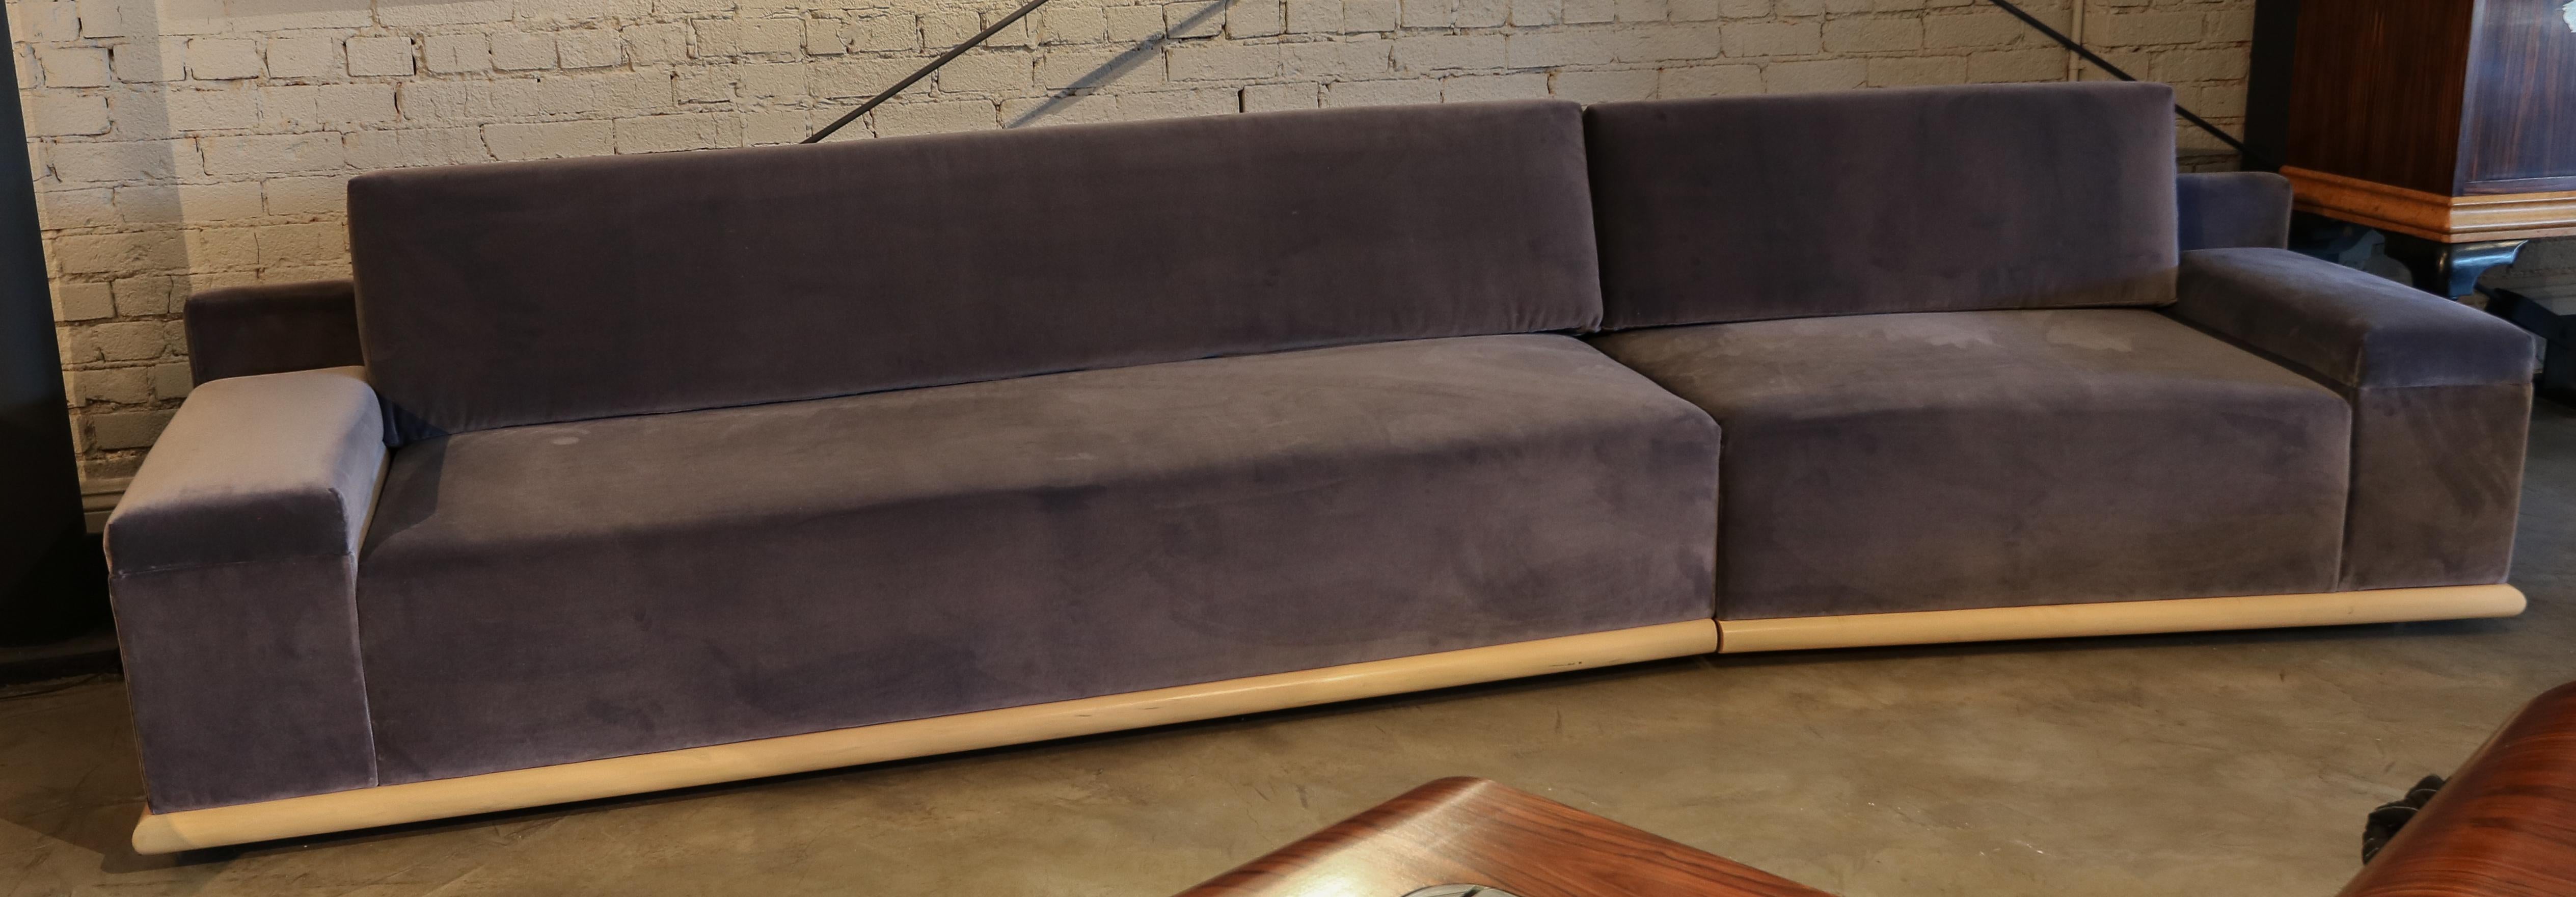 Custom midcentury style sectional sofa in plush velvet in lavender purple with maple wood base. Made in Los Angeles by Adesso Imports. Can be done in different sizes, colors and fabrics.

Measures: Large section 83